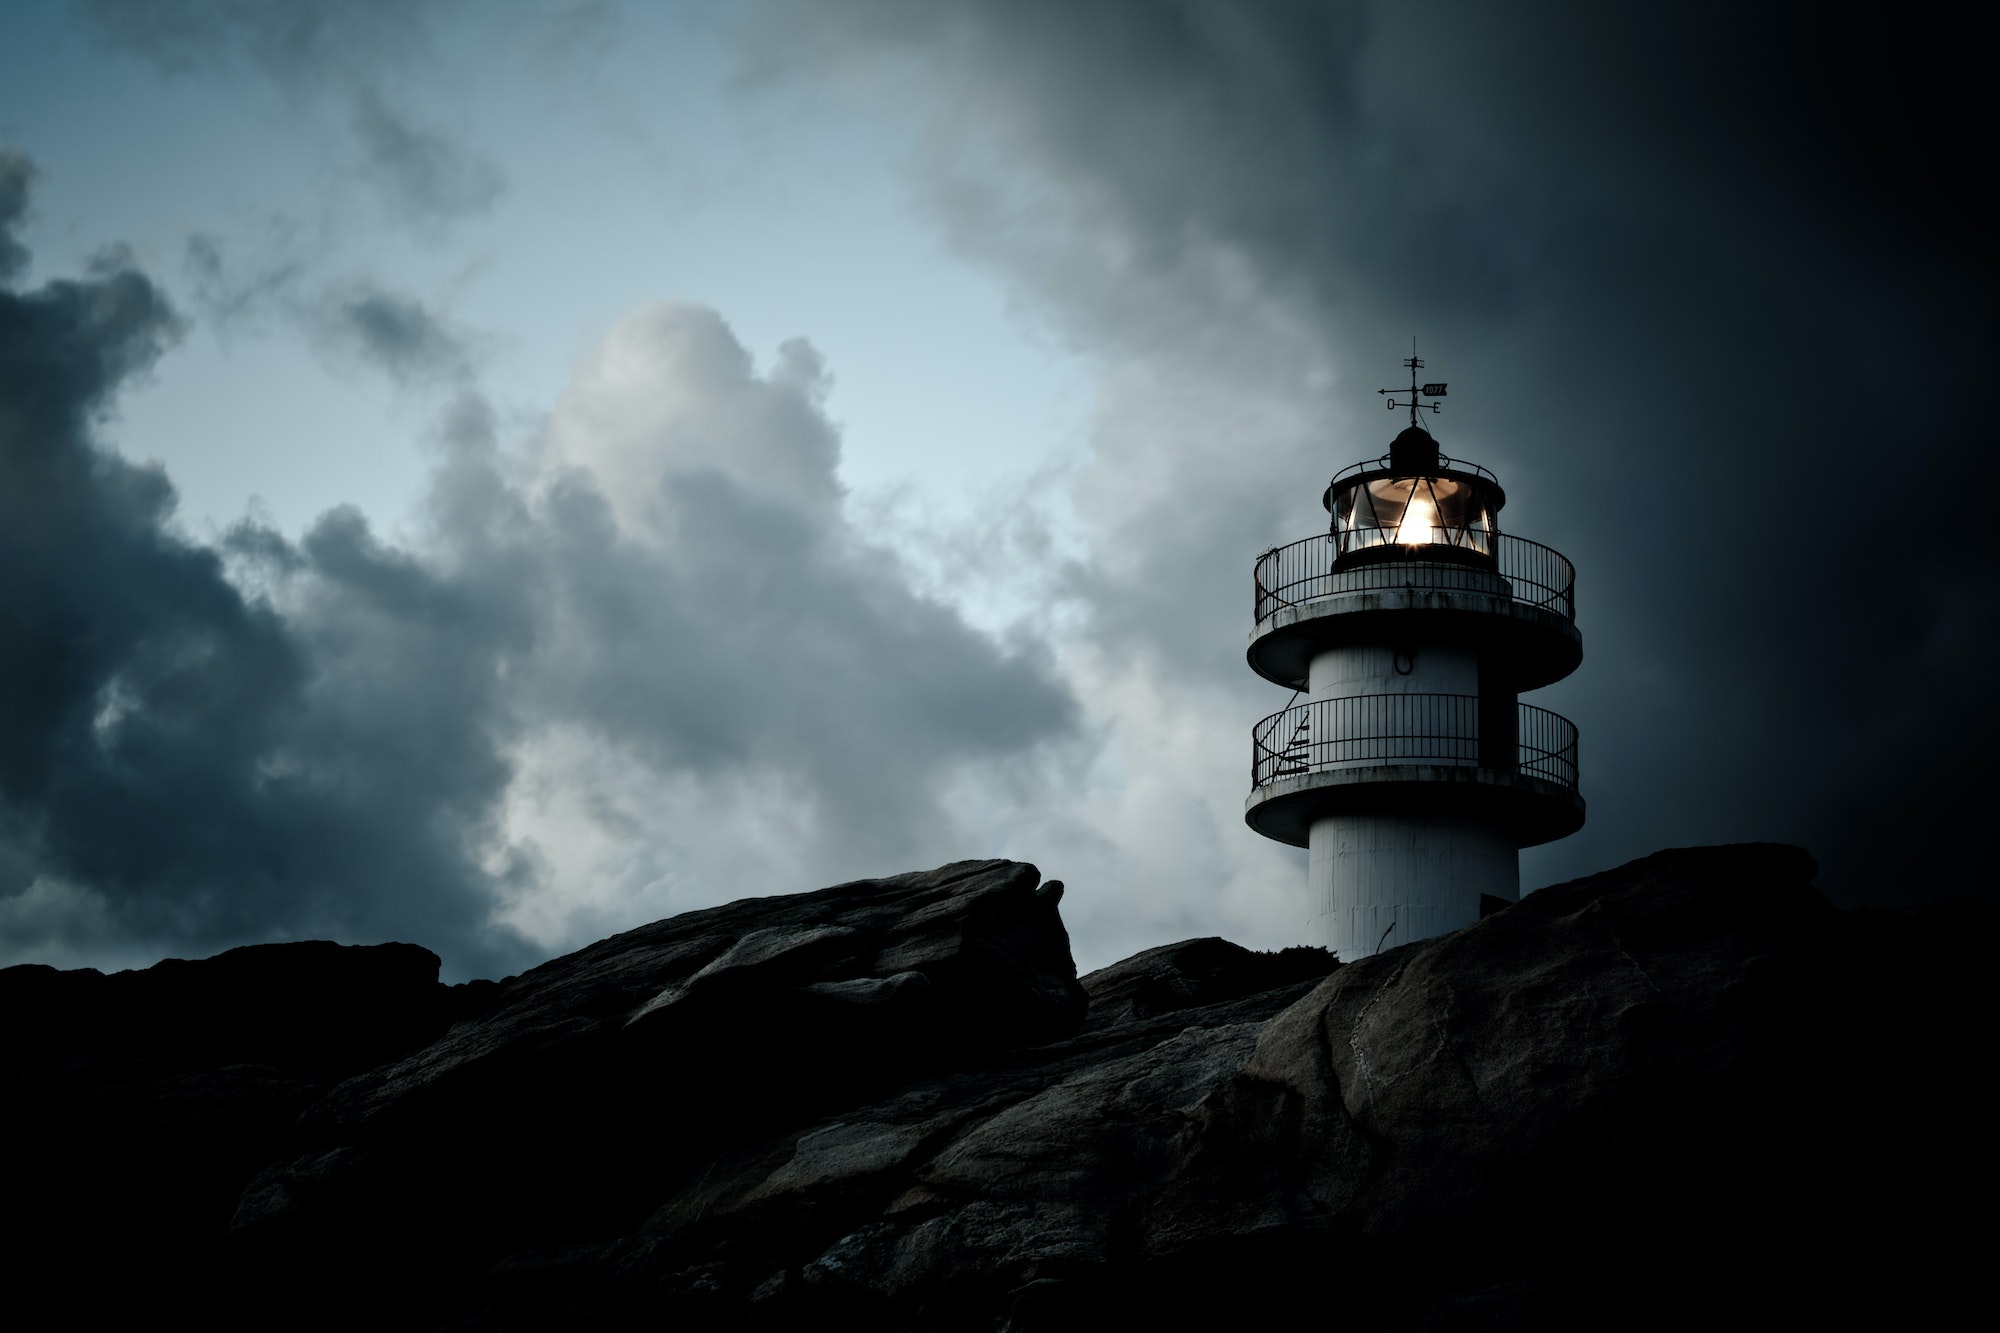 Working Lighthouse at Bad Weather